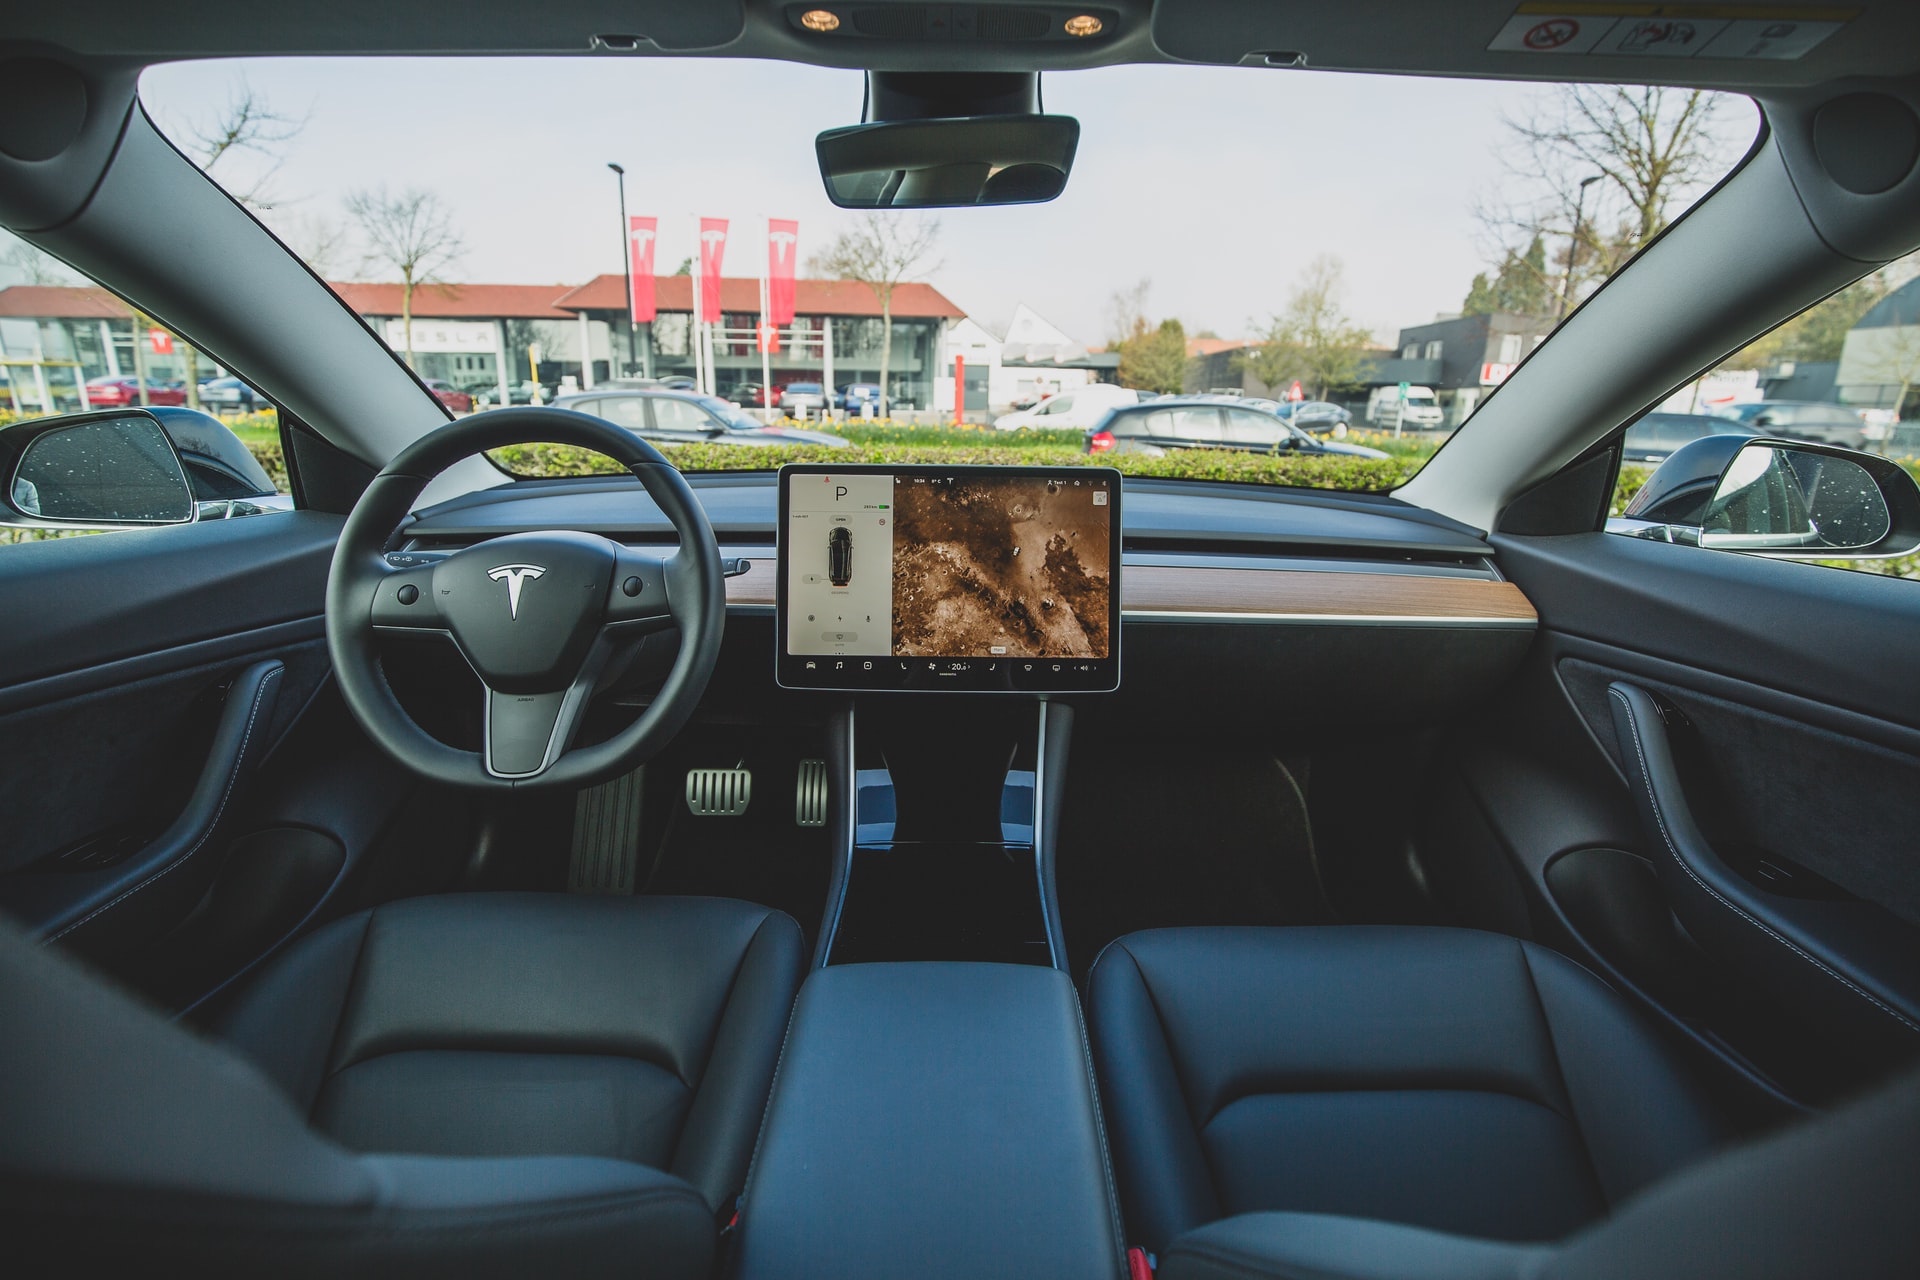 The government is investigating why Tesla drivers can play solitaire at the wheel